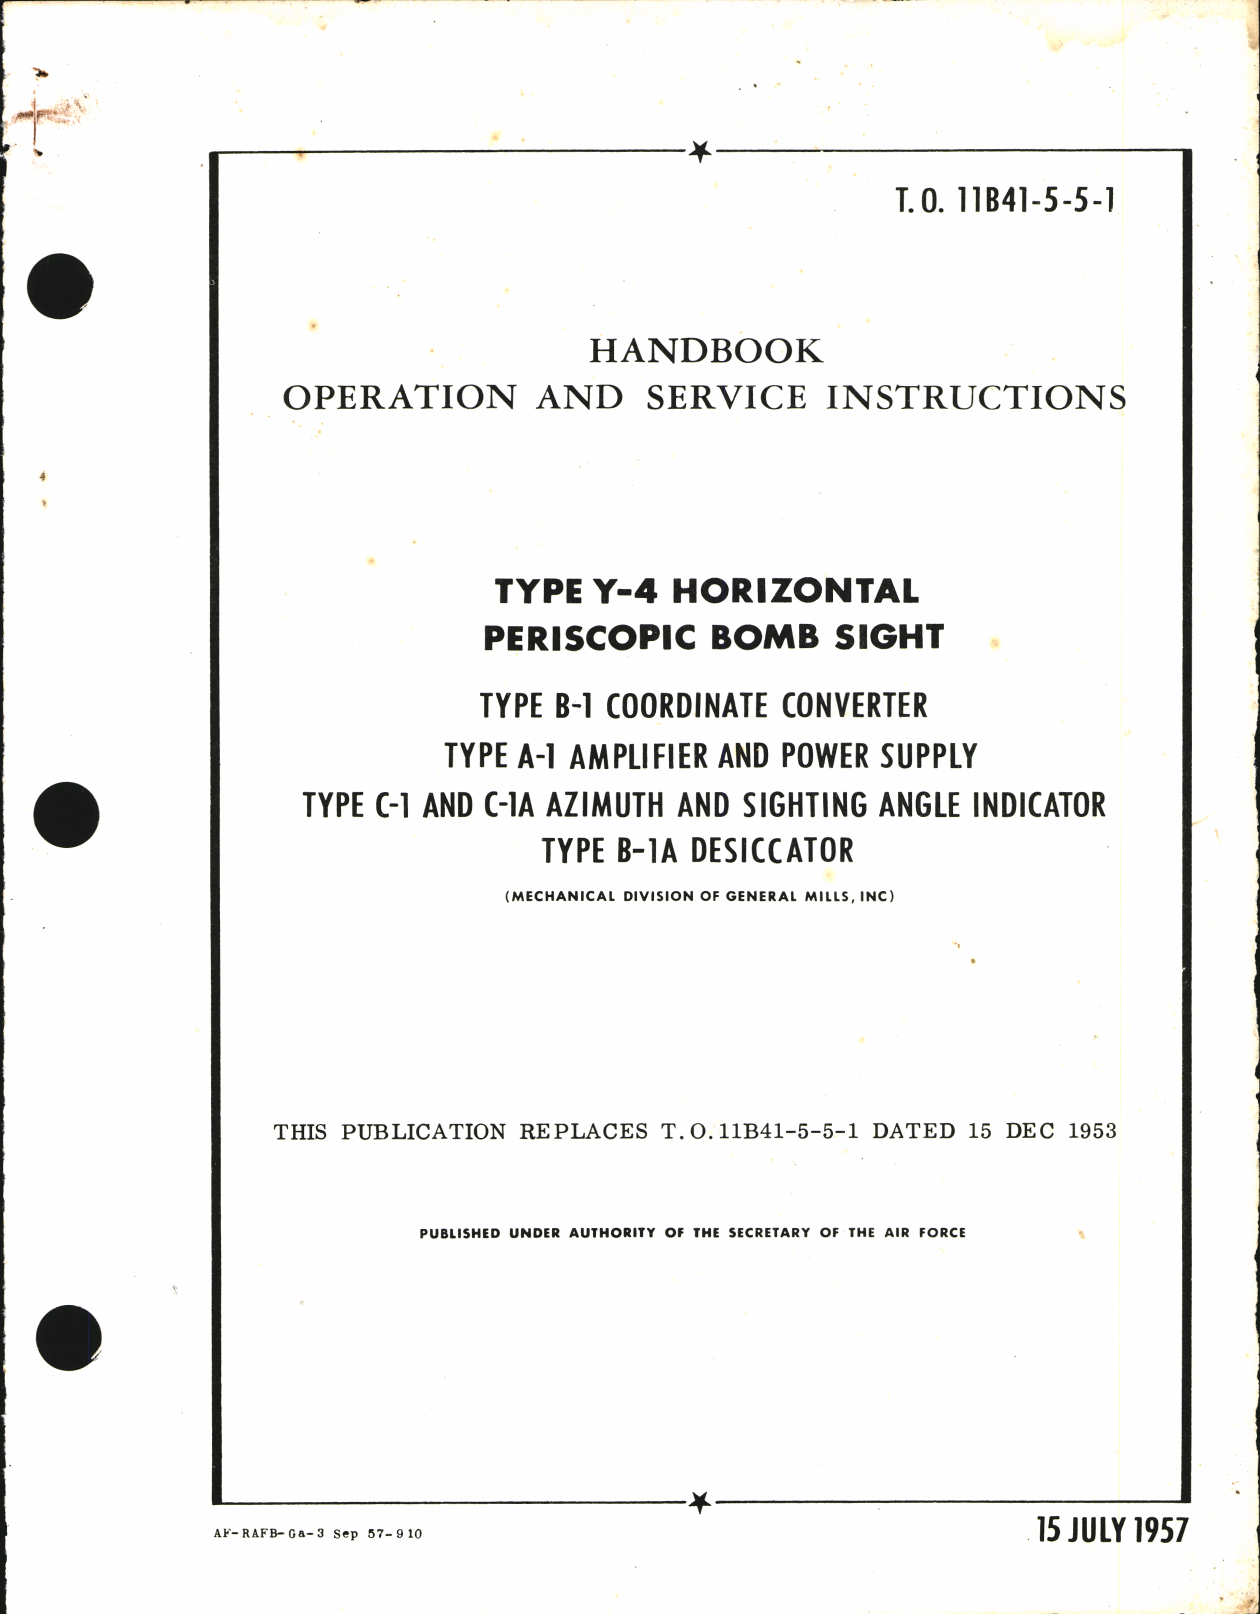 Sample page 1 from AirCorps Library document: Operation and Service Instructions for Type Y-4 Horizontal Periscopic Bombsight